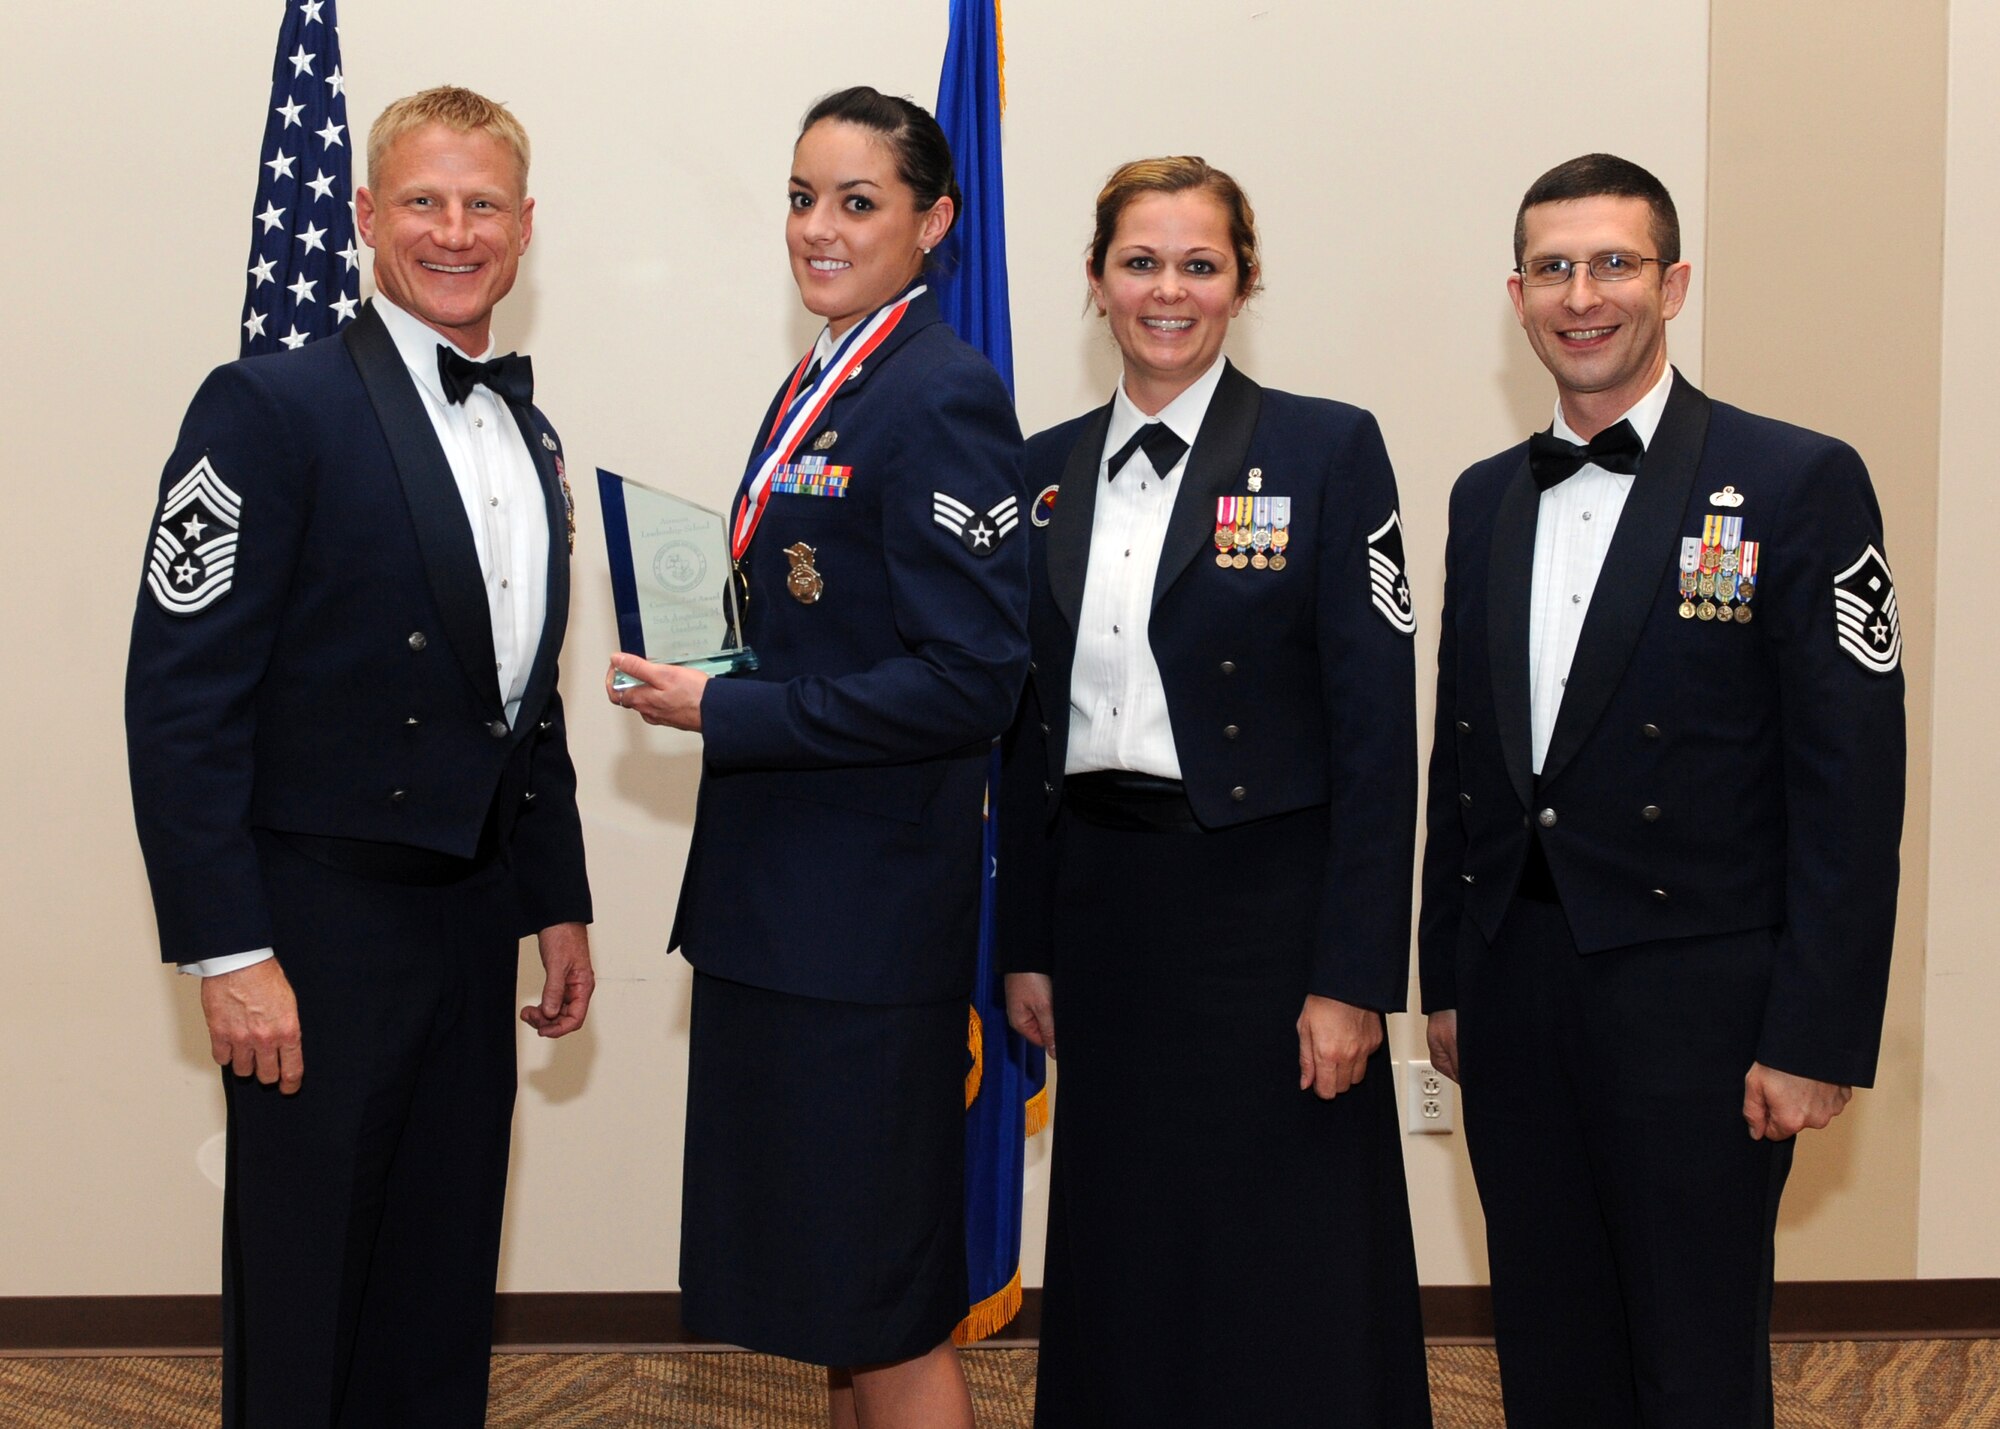 Senior Airman Angelina M. Gazboda, 460th Security Forces Squadron, second from left, receives the Commandant Award during the Buckley Airman Leadership School Class 14-A graduation Dec. 4, 2013, at the Leadership Development Center on Buckley Air Force Base, Colo. The Commandant Award is presented to the student who displayed all the characteristics of an effective leader during ALS. (U.S. Air Force photo by Senior Airman Marcy Copeland/Released)